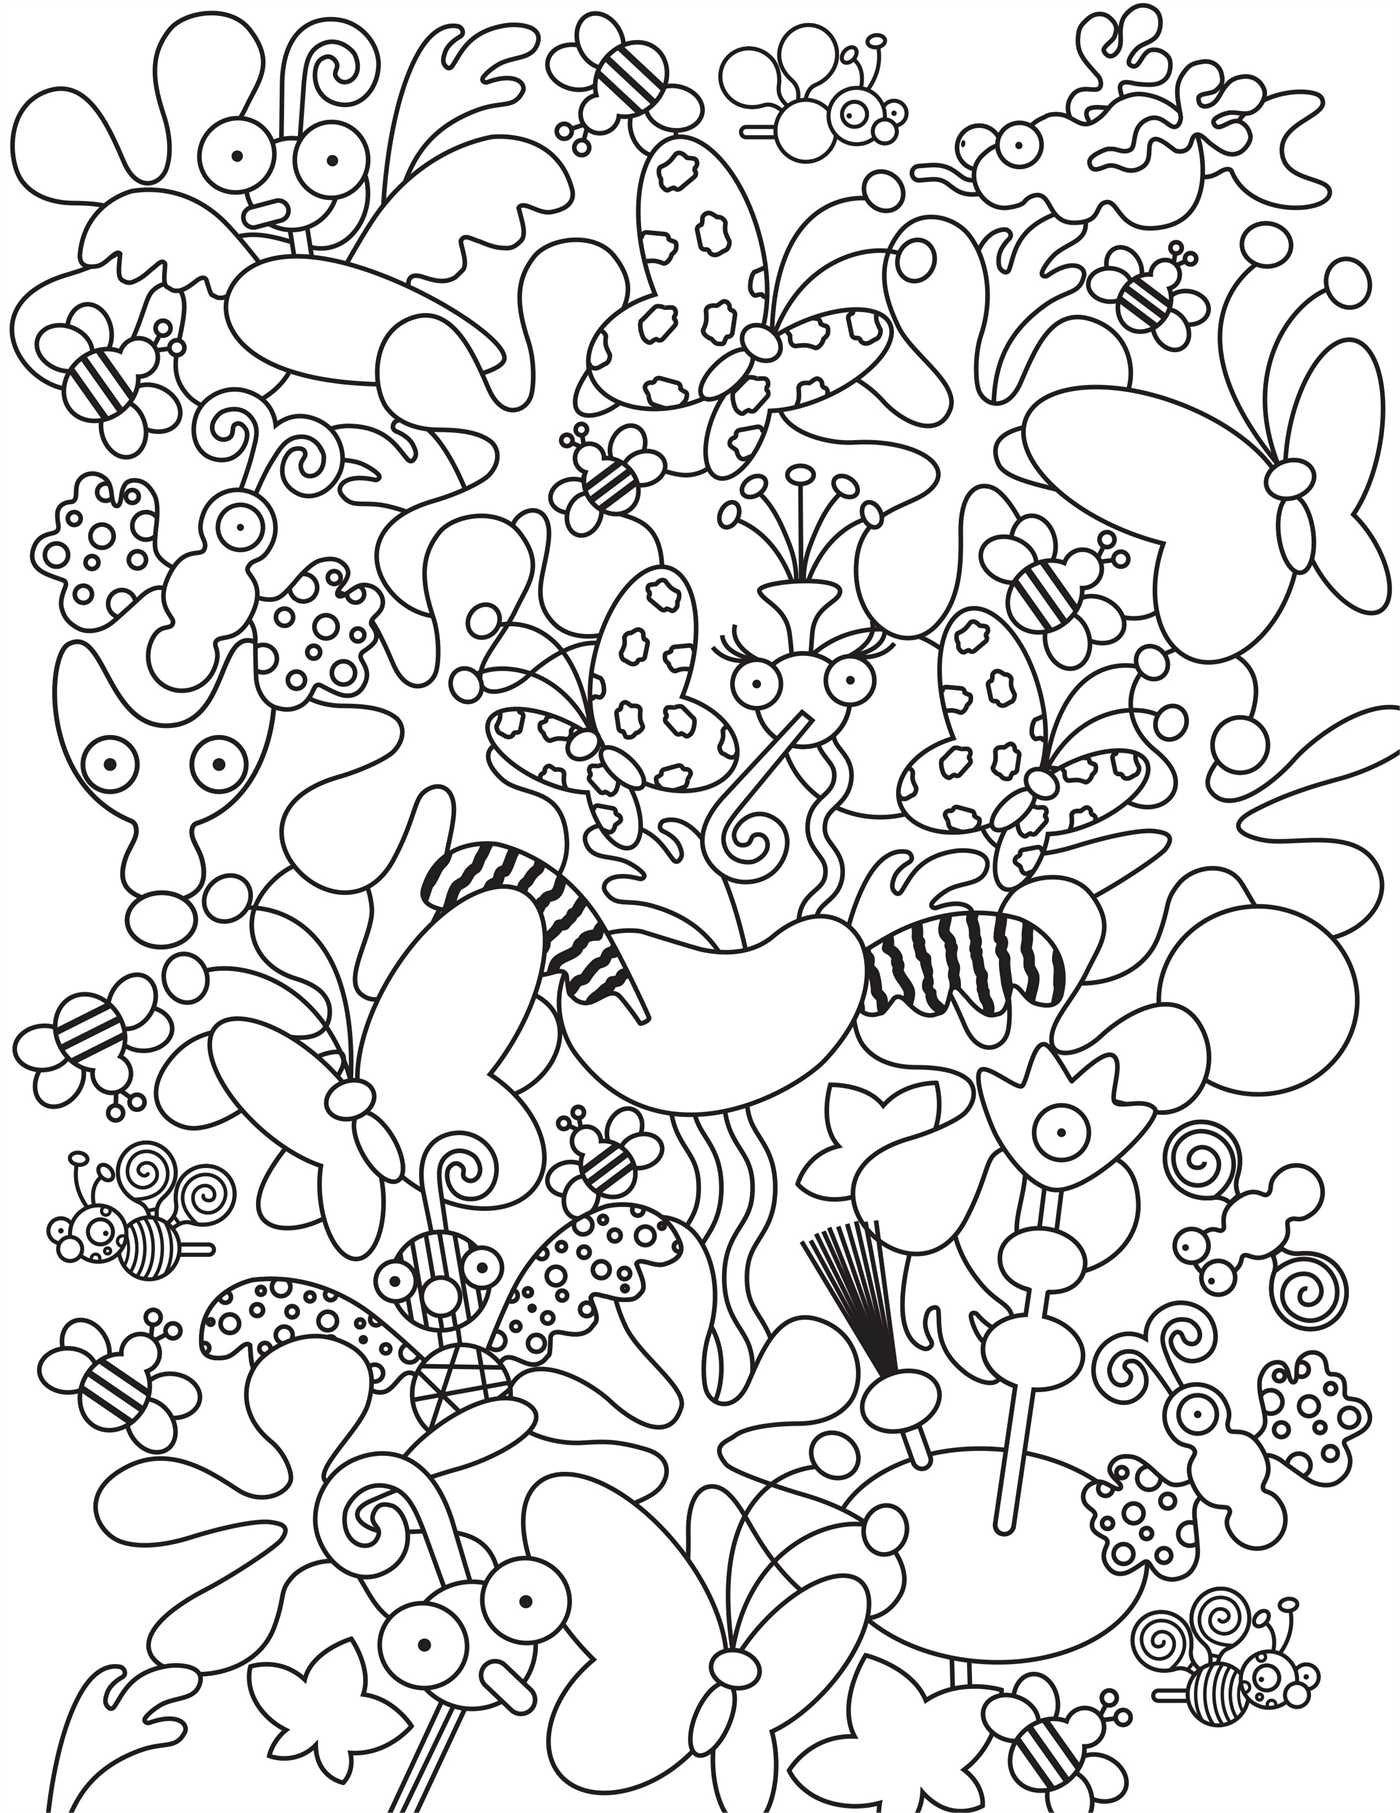 scribble-art-coloring-pages